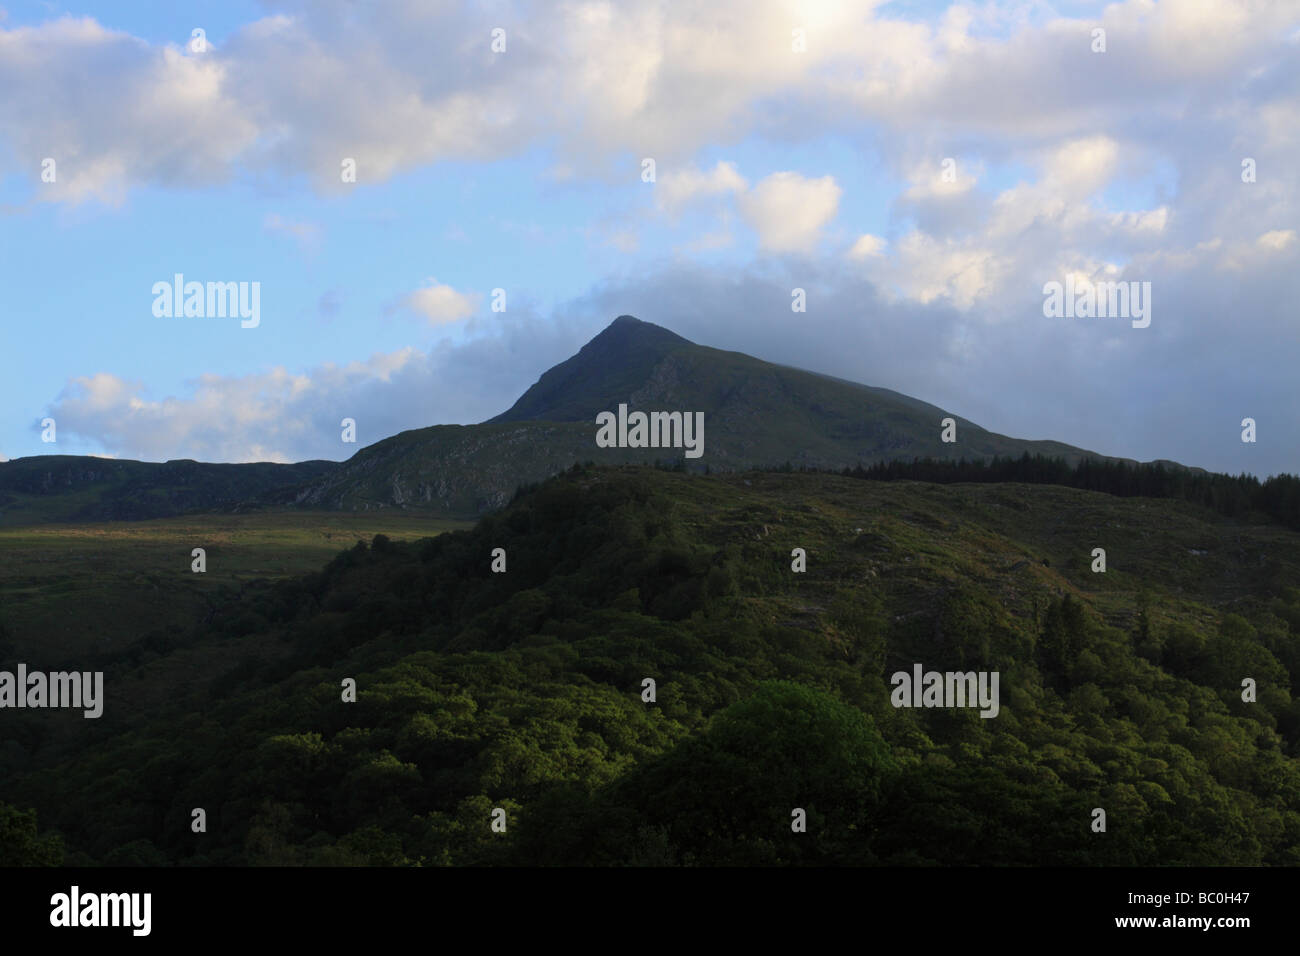 Moel Siabod, a mountain in Snowdonia, basks in evening light. Viewed from the north Stock Photo